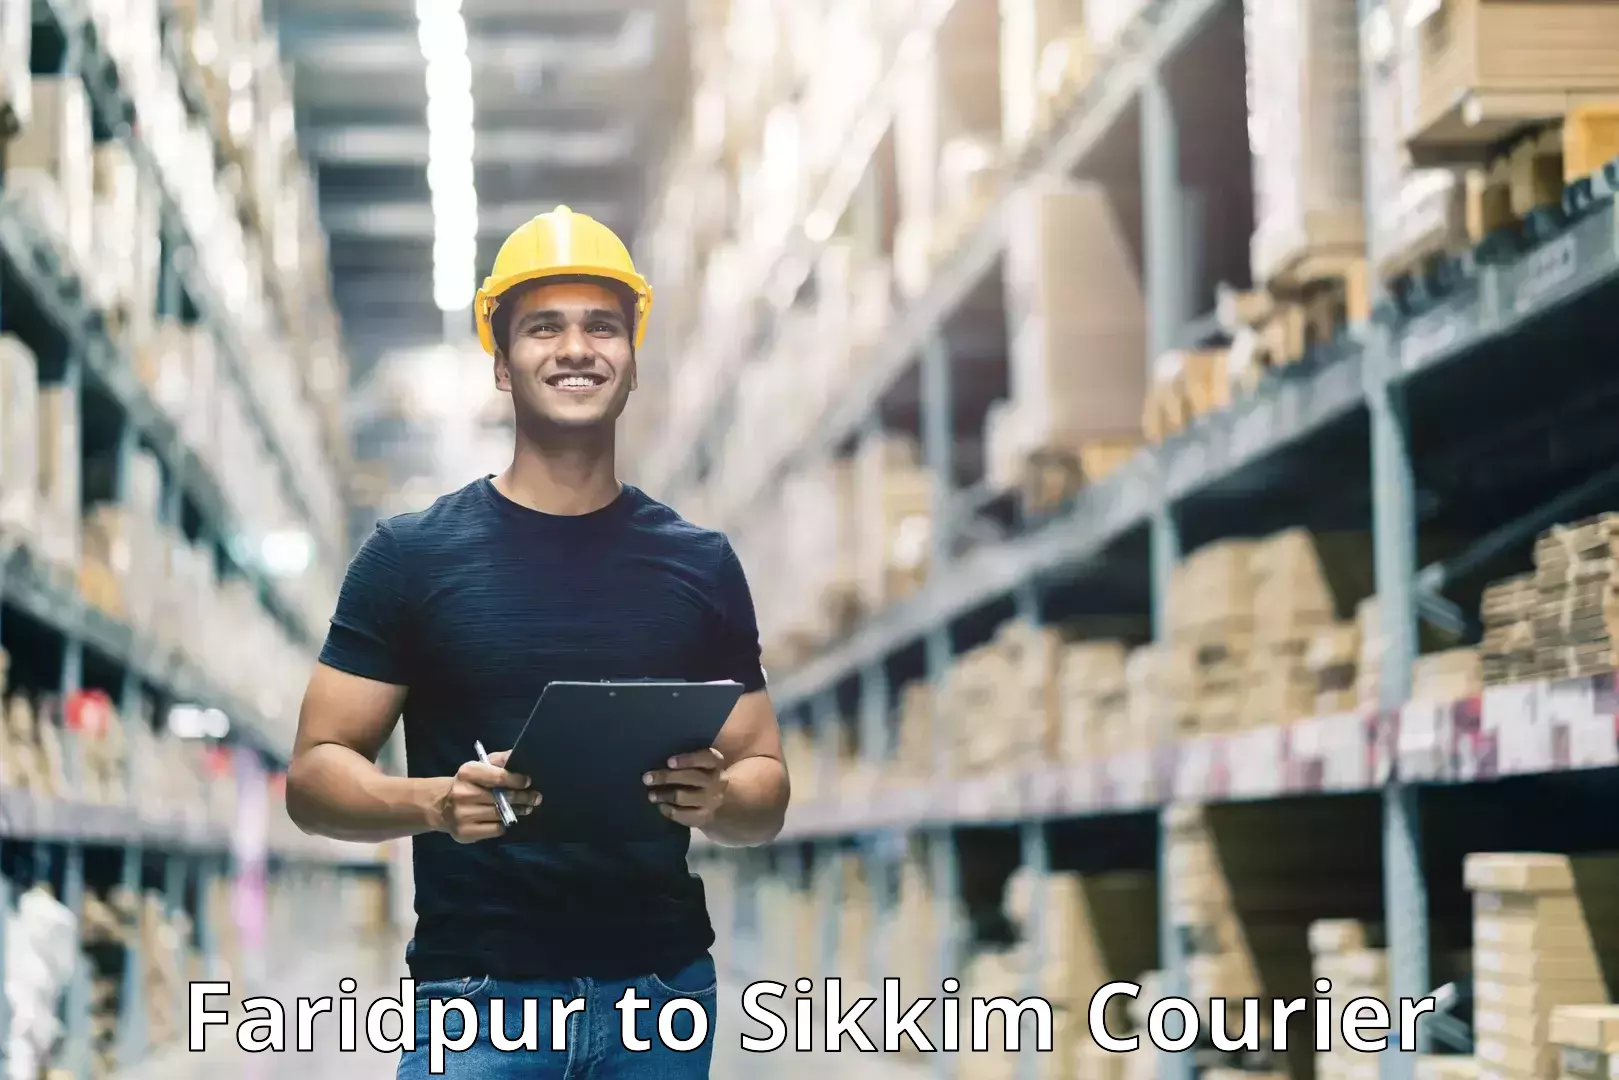 Customer-centric shipping Faridpur to South Sikkim